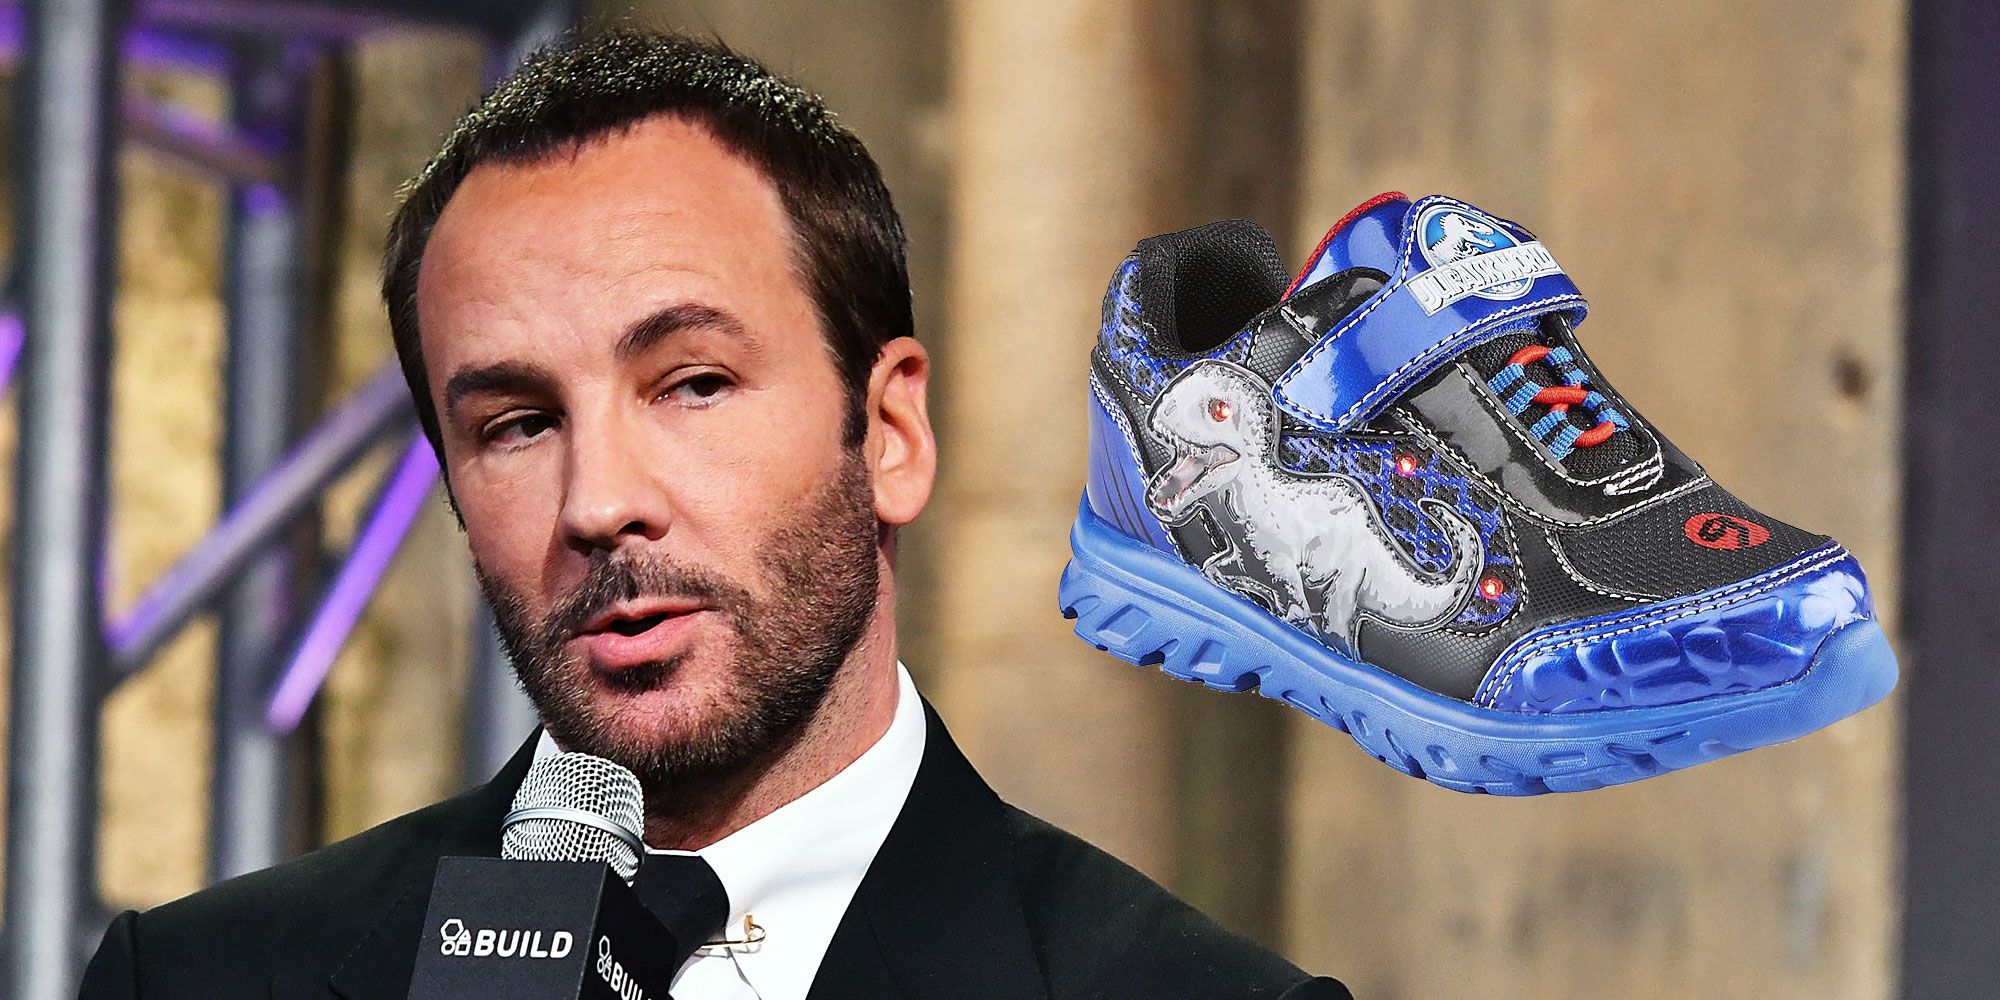 Tom Ford Tells His 4-Year-Old Son His Dinosaur Shoes Are Tacky